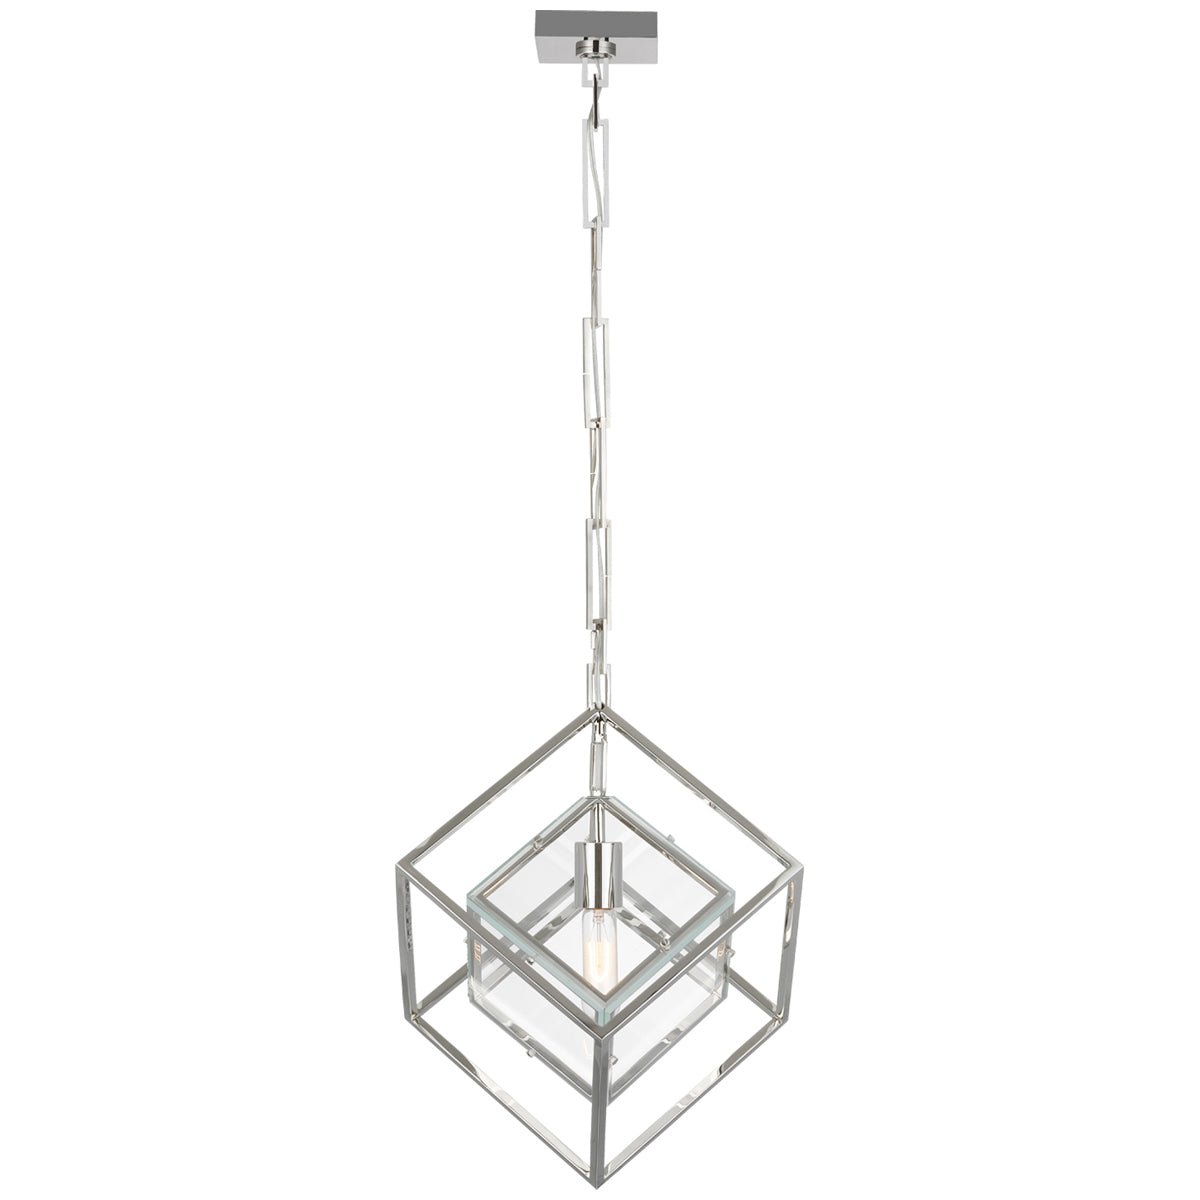 Visual Comfort Cubed Medium Pendant with Clear Glass